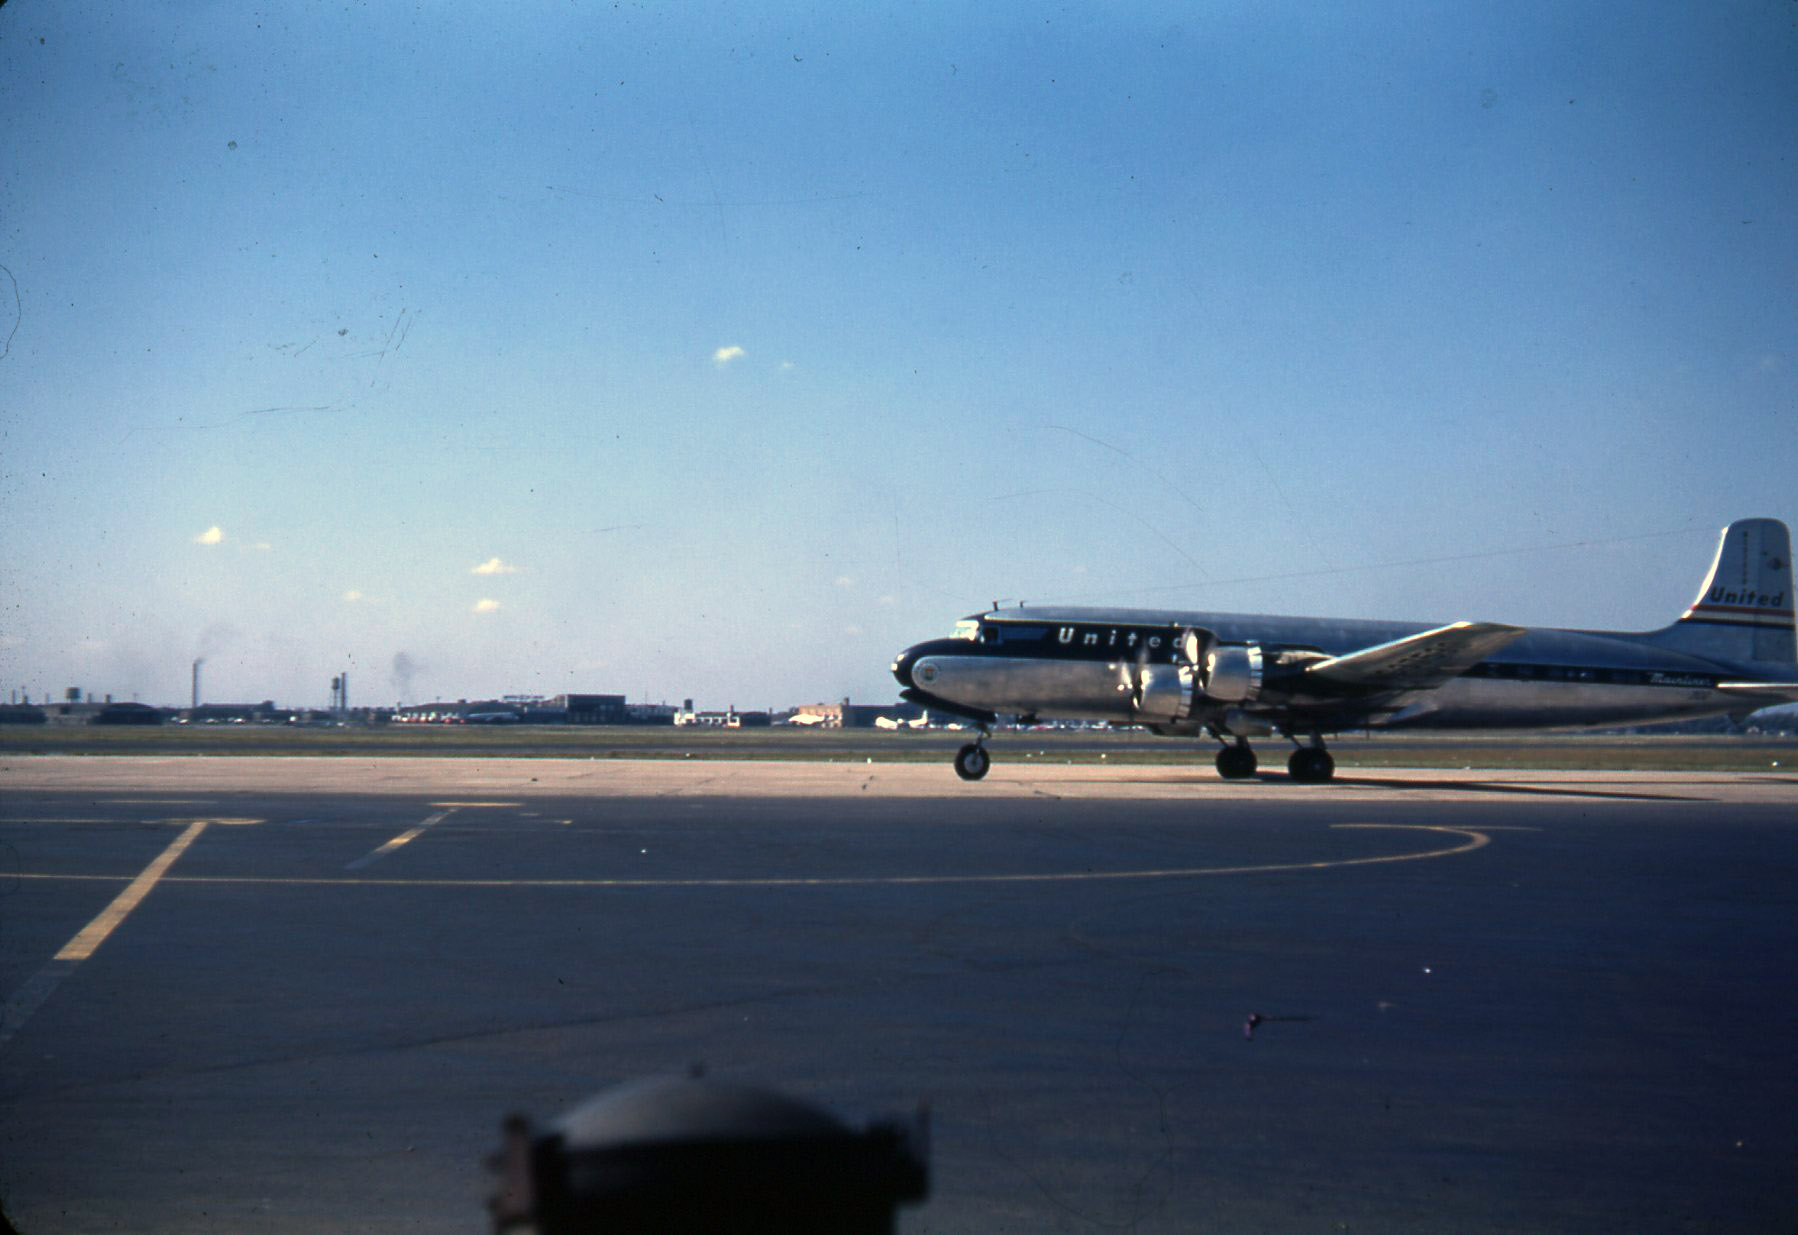 My Grandma and Grandpa arriving in Chicago, maybe?  Late 40's Kodachrome. View full size.